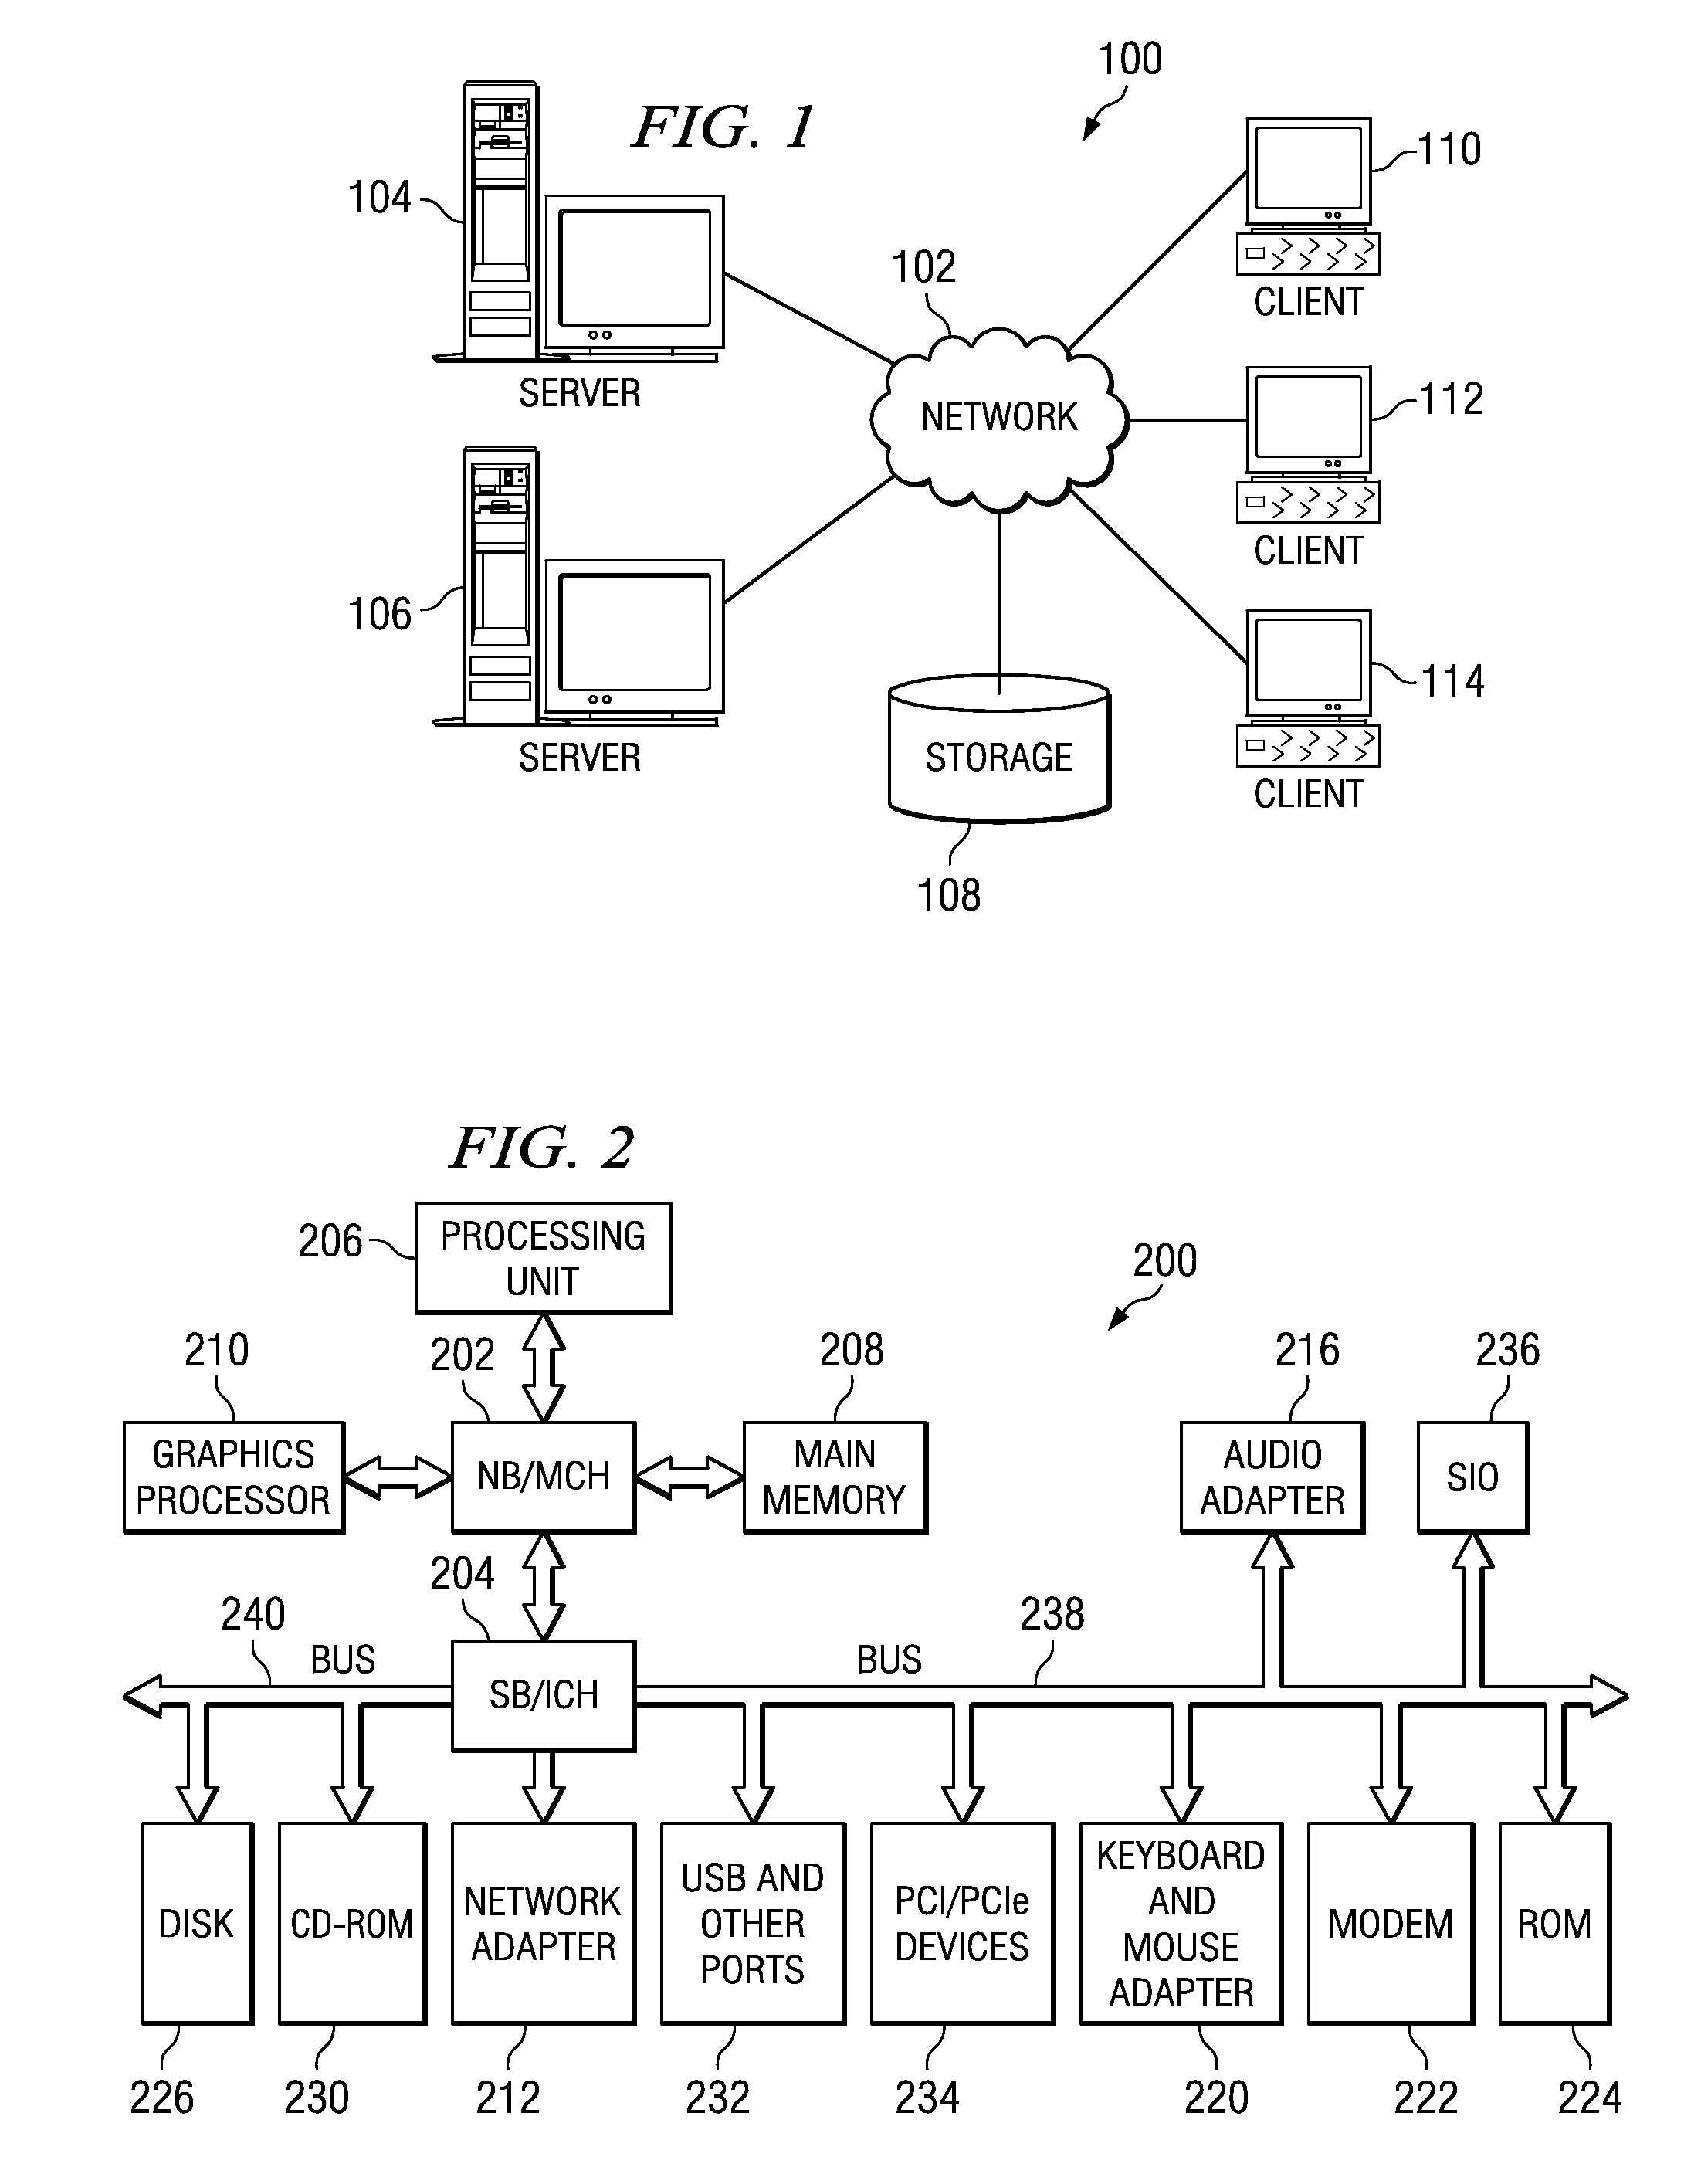 System and Method for Automatically Providing a Web Resource for a Broken Web Link